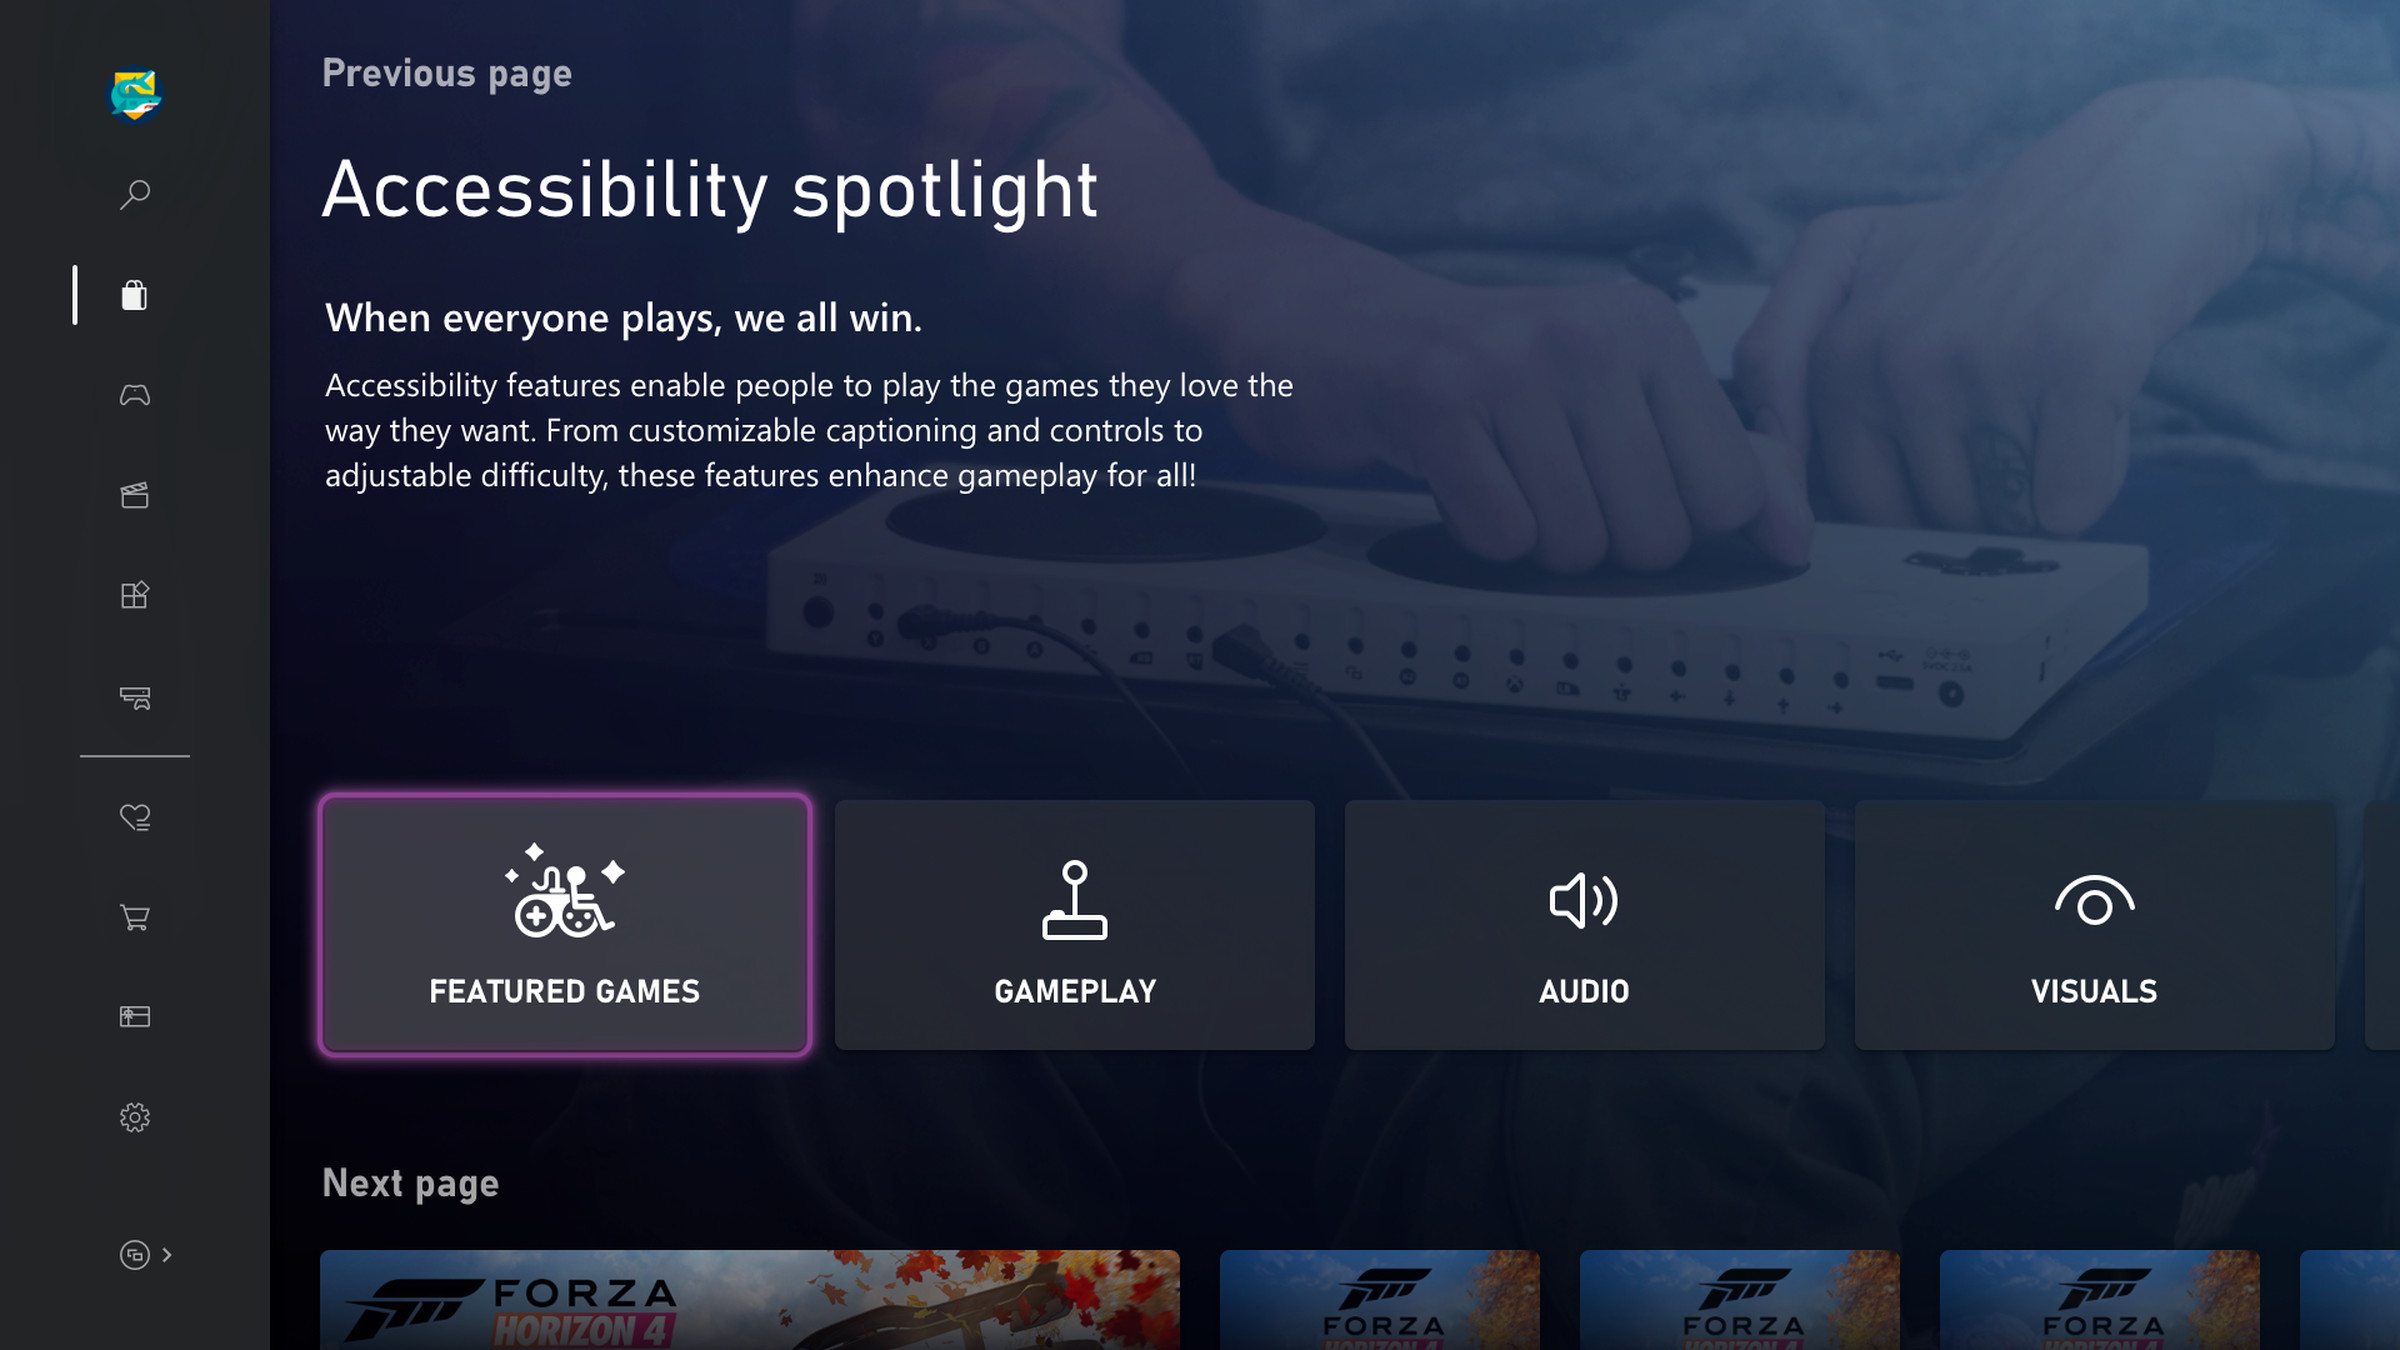 Screenshot of Microsoft store titled “Accessibility spotlight” showing categories for featured games, gameplay, audio, and visual features. 